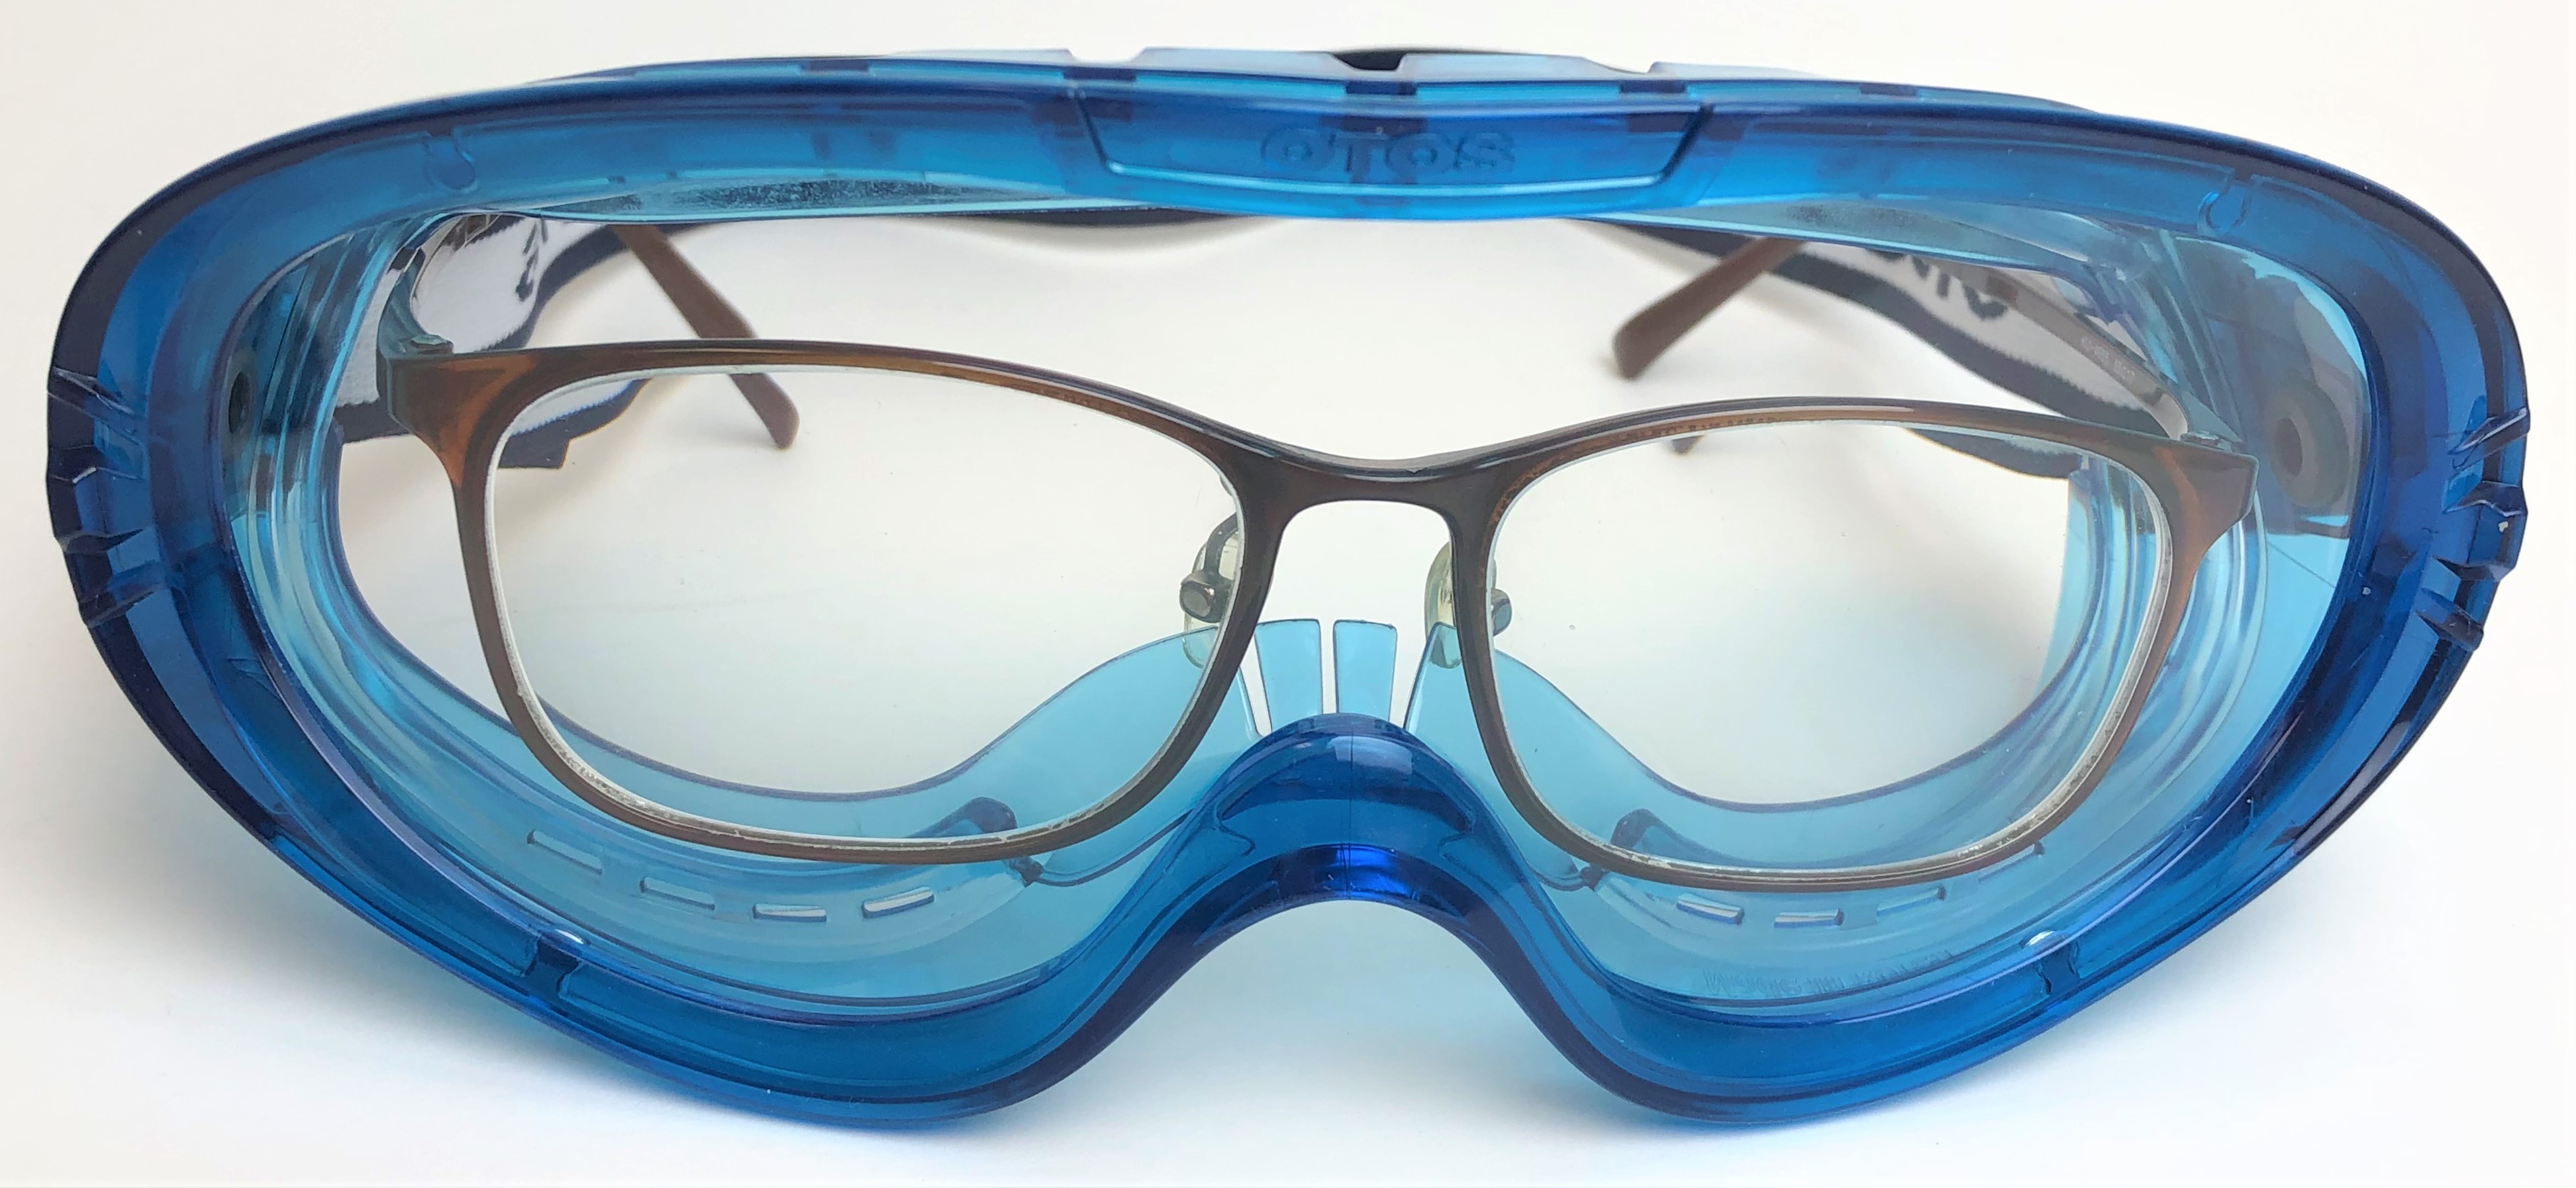 OTOS Goggle can be worn with glasses